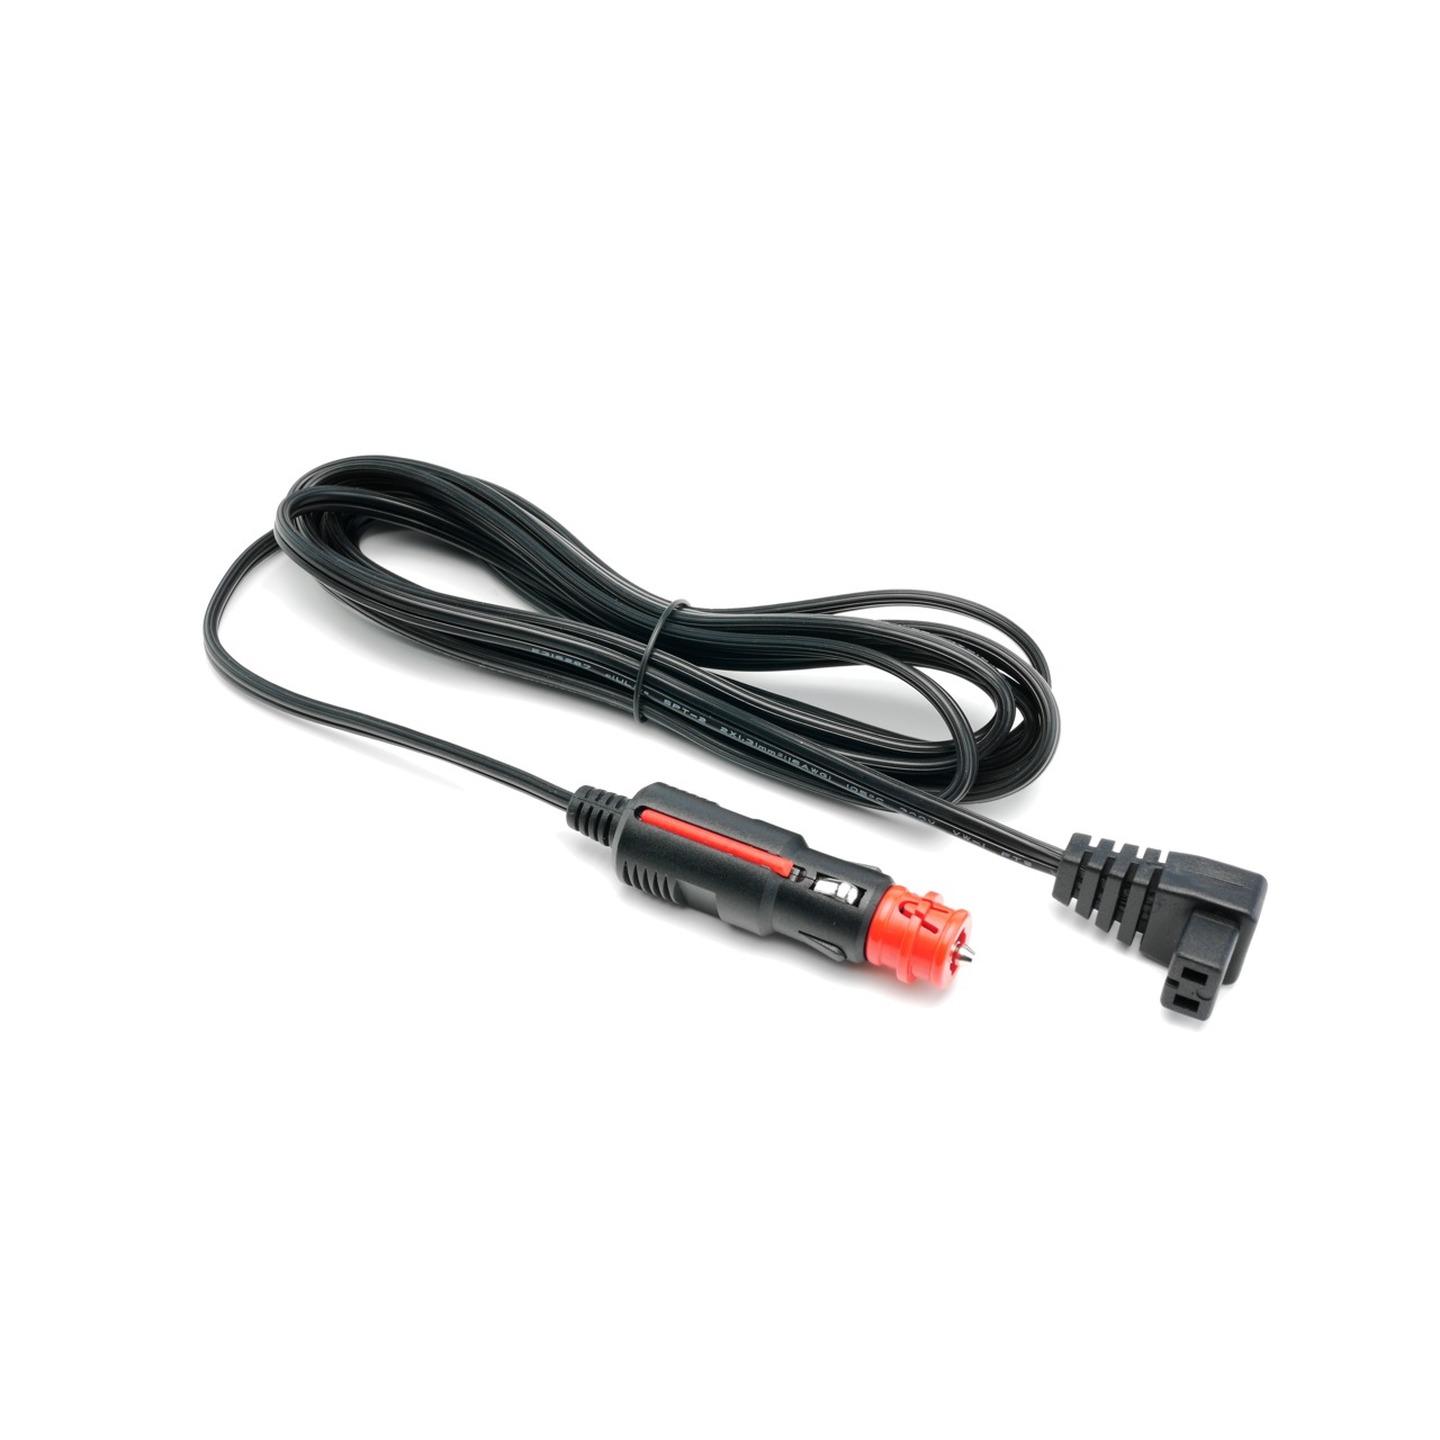 12/24V Power Cable for Brass Monkey and Waeco Fridges